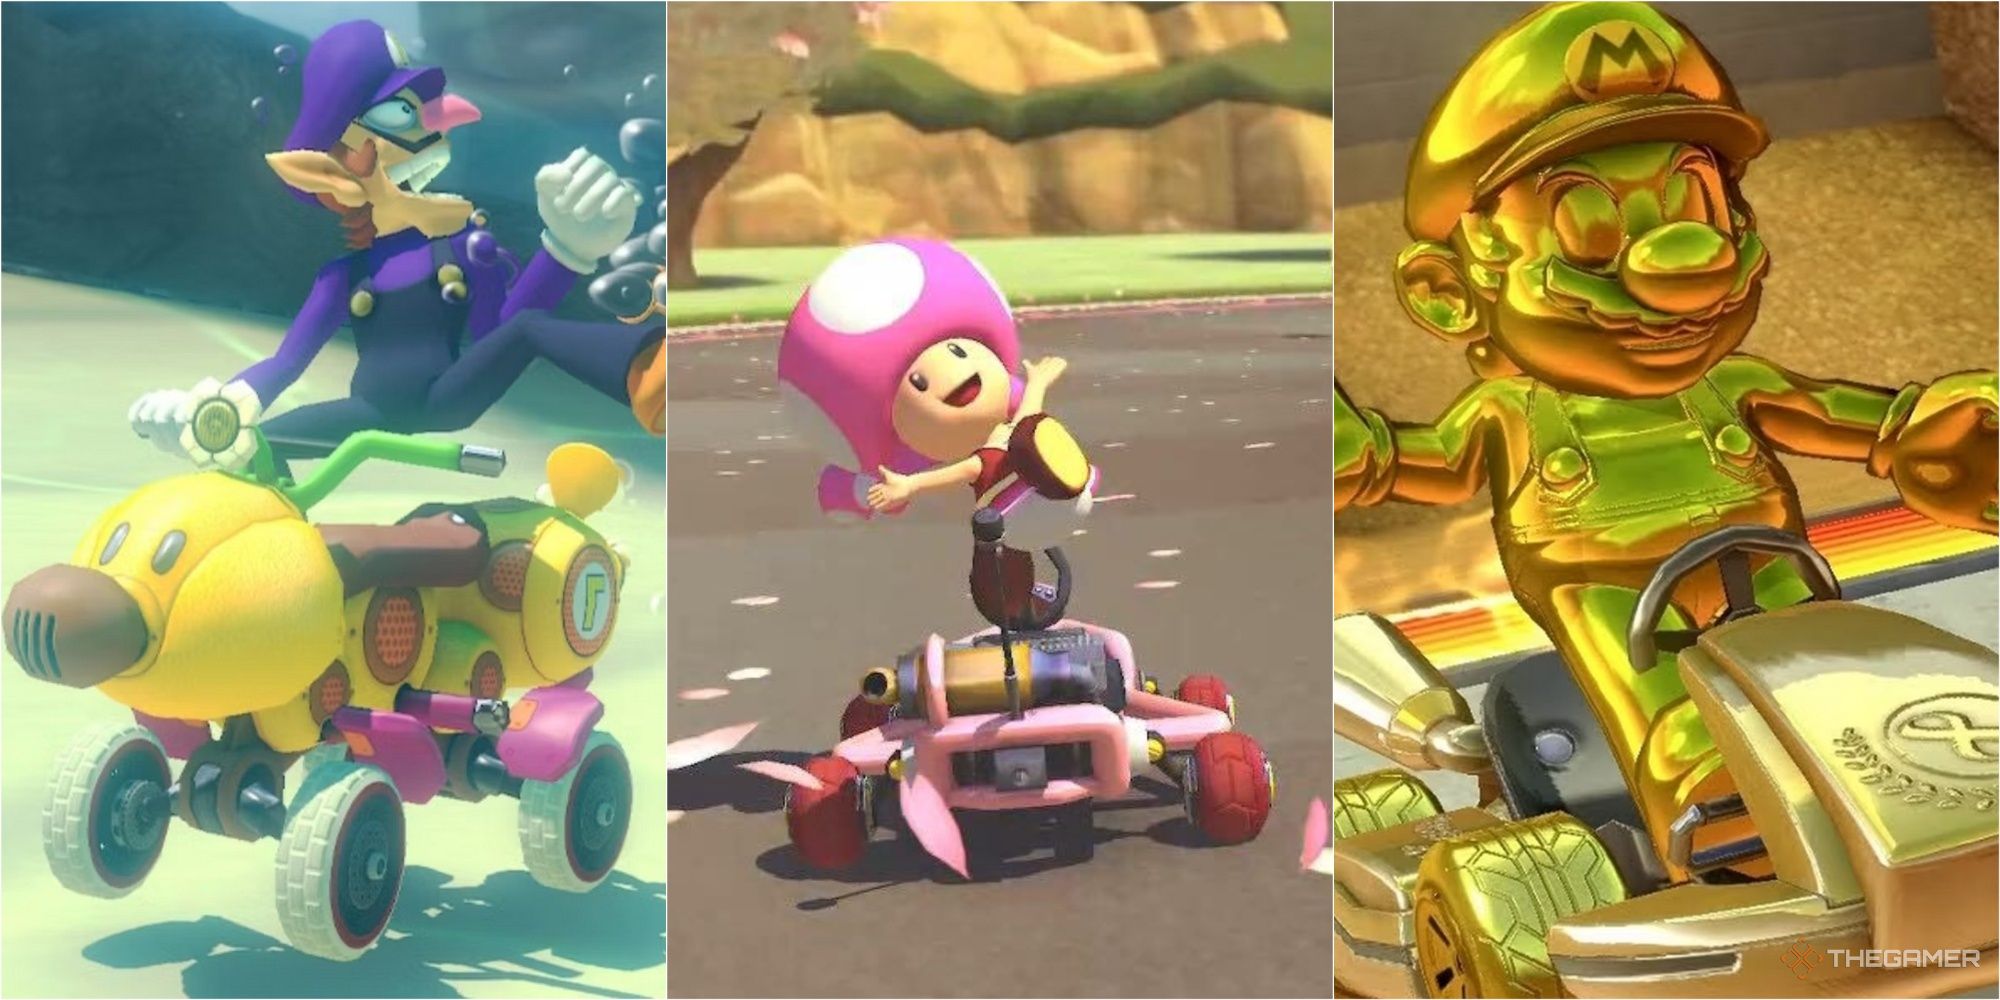 waluigi on wiggler, toadette on the pipe frame, and gold mario on the gold kart mario kart 8 best combo